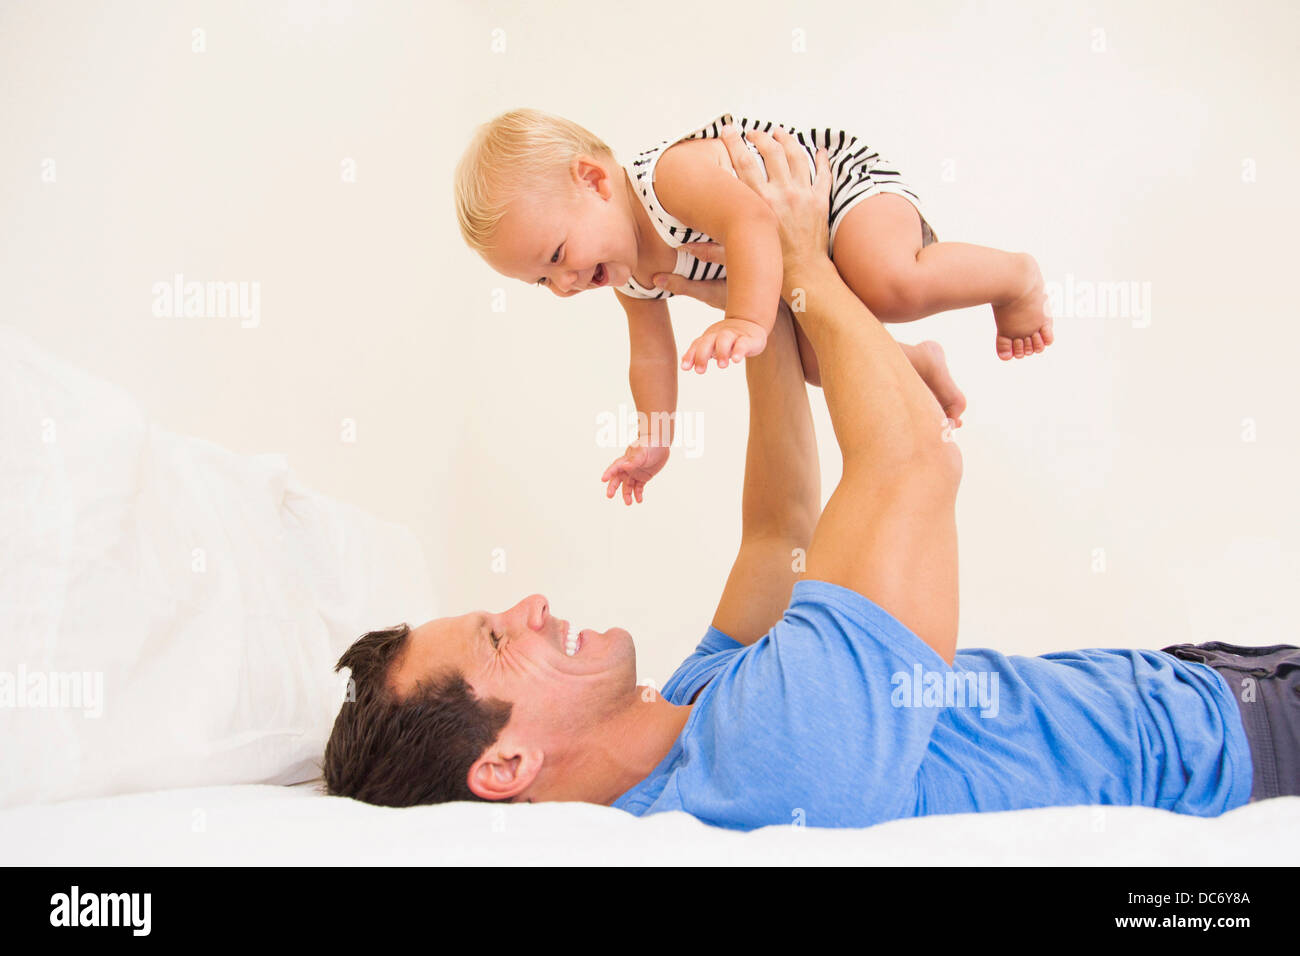 Man playing with baby boy (6-11 months) Stock Photo